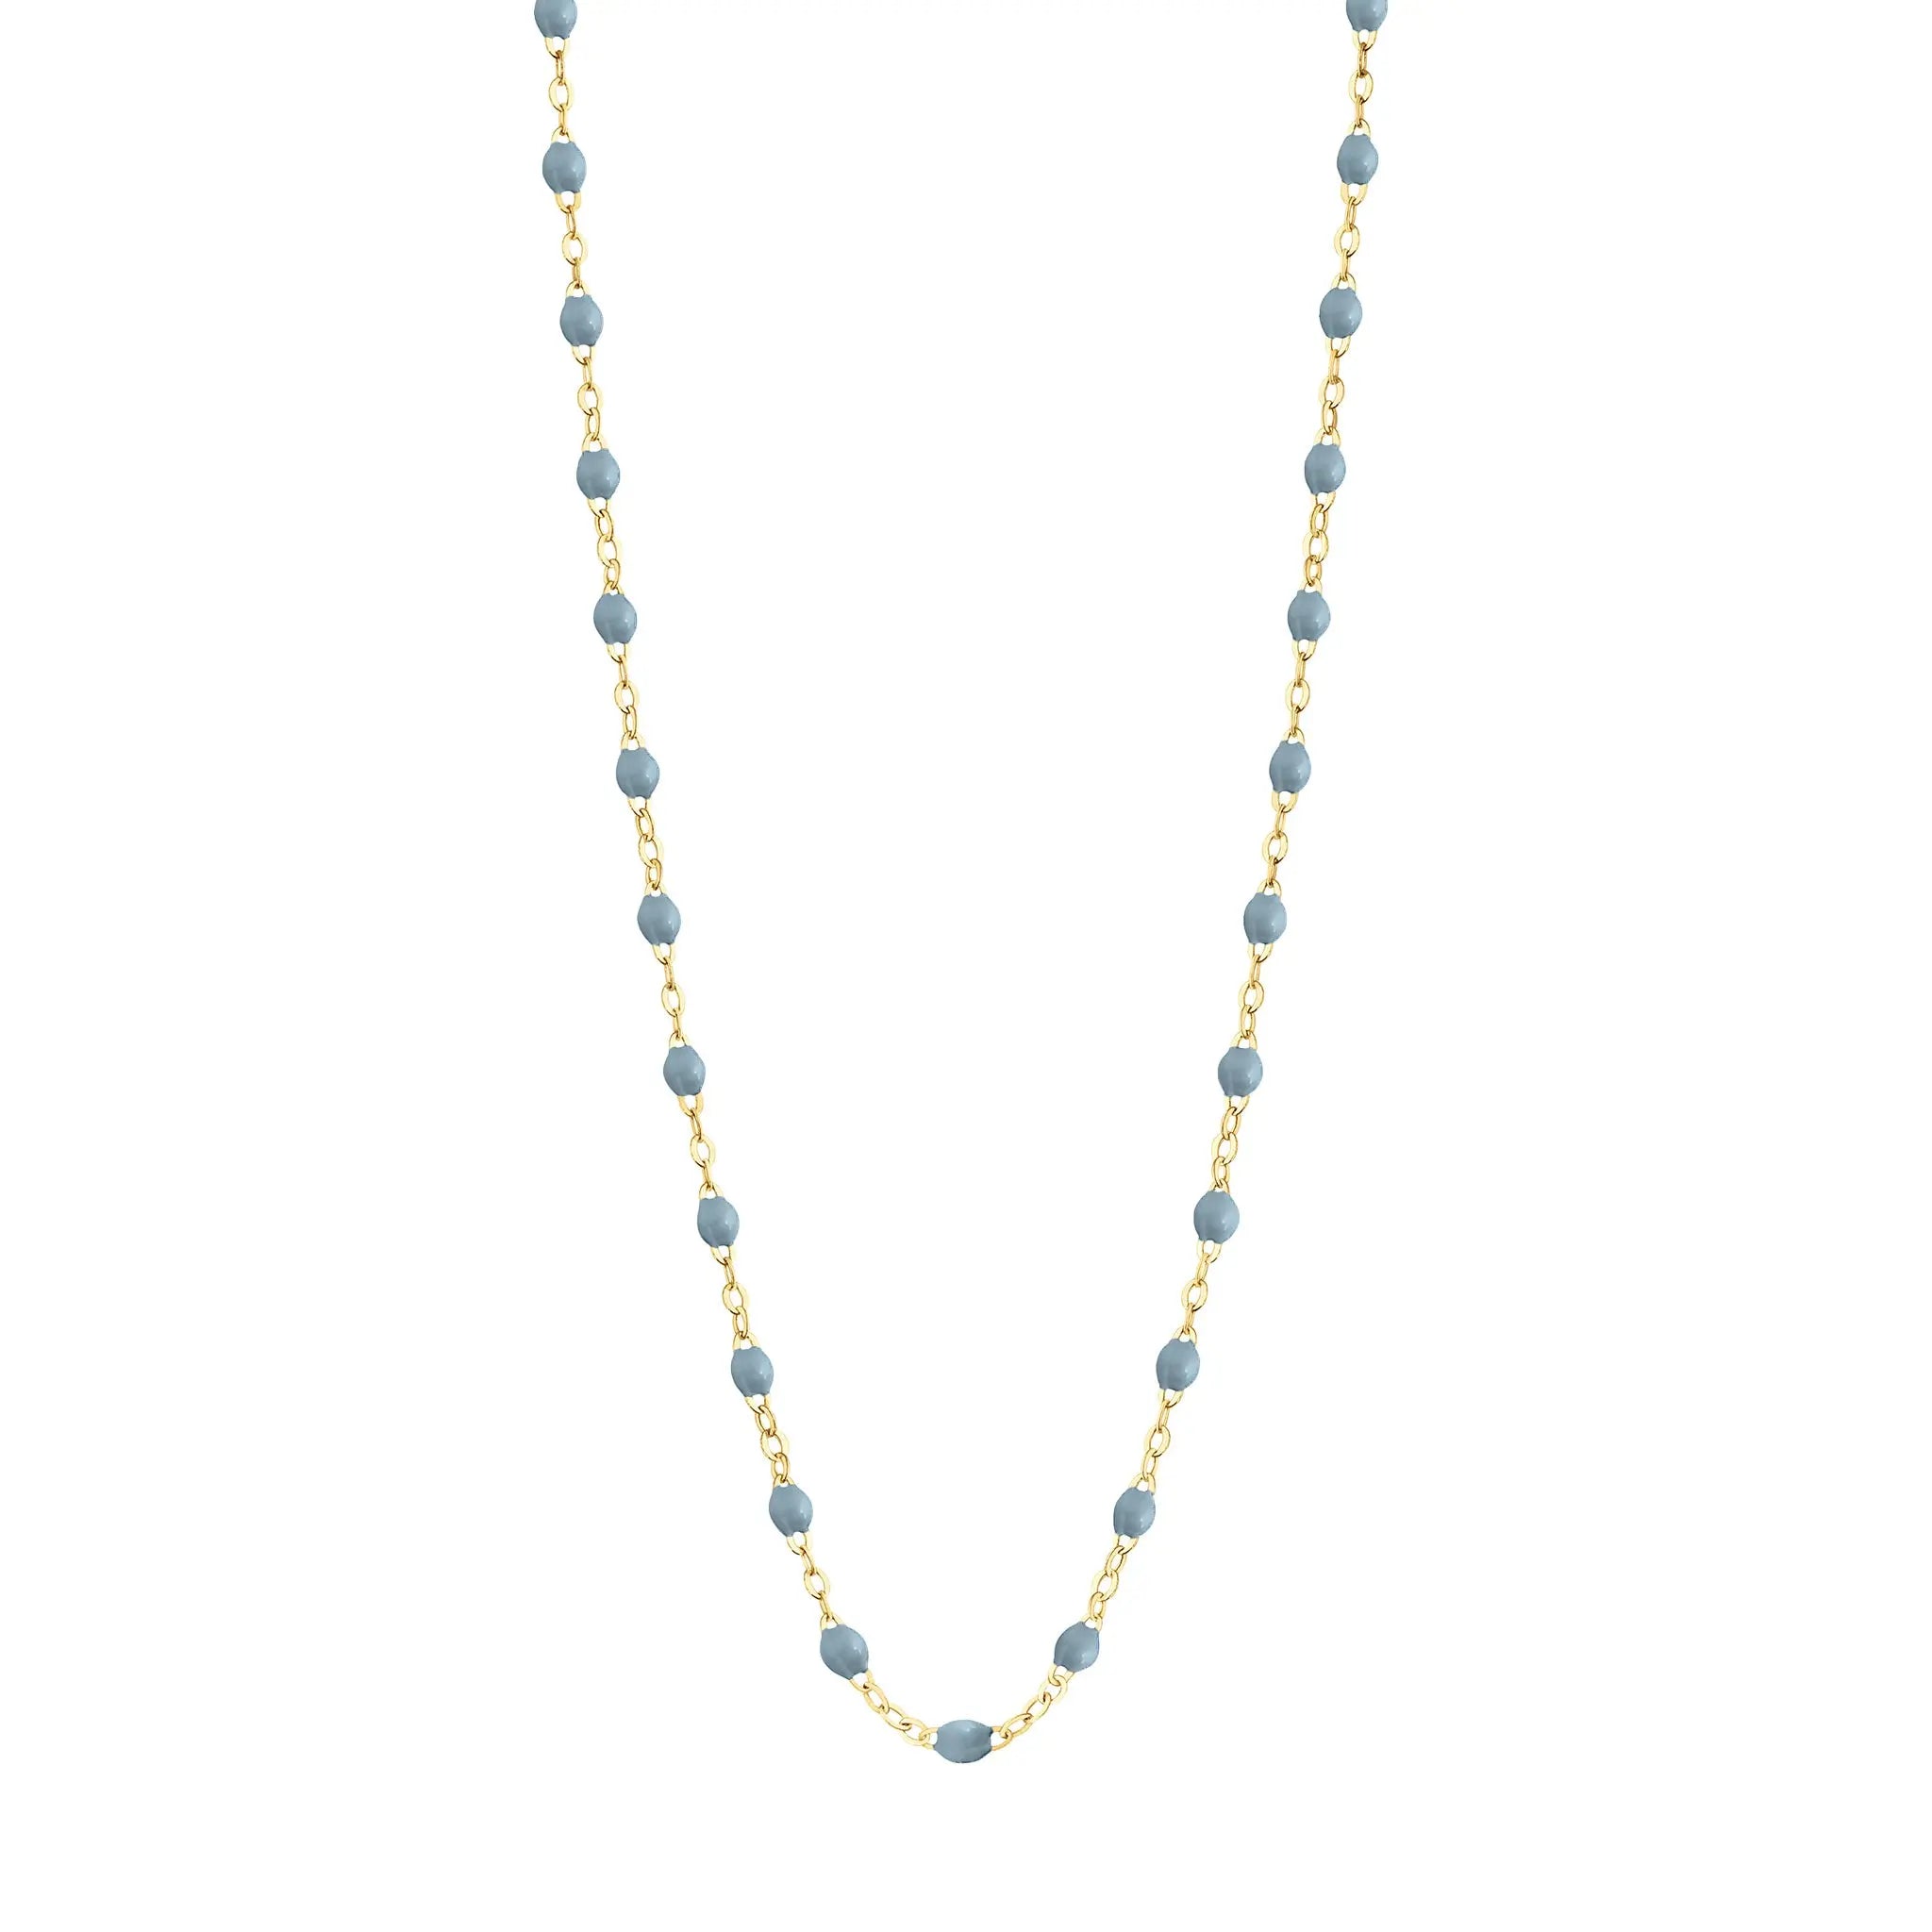 Stack you necklace layers with this versatile beaded chain! The Classic Gigi Necklace by gigi CLOZEAU features 18 carat yellow gold, and striking Jeans resin jewels for an everyday effortless appearance. Handcrafted in 18k yellow gold. The beads measure 1.50mm in diameter and is finished with a spring ring clasp. The length is 16.5 inches.